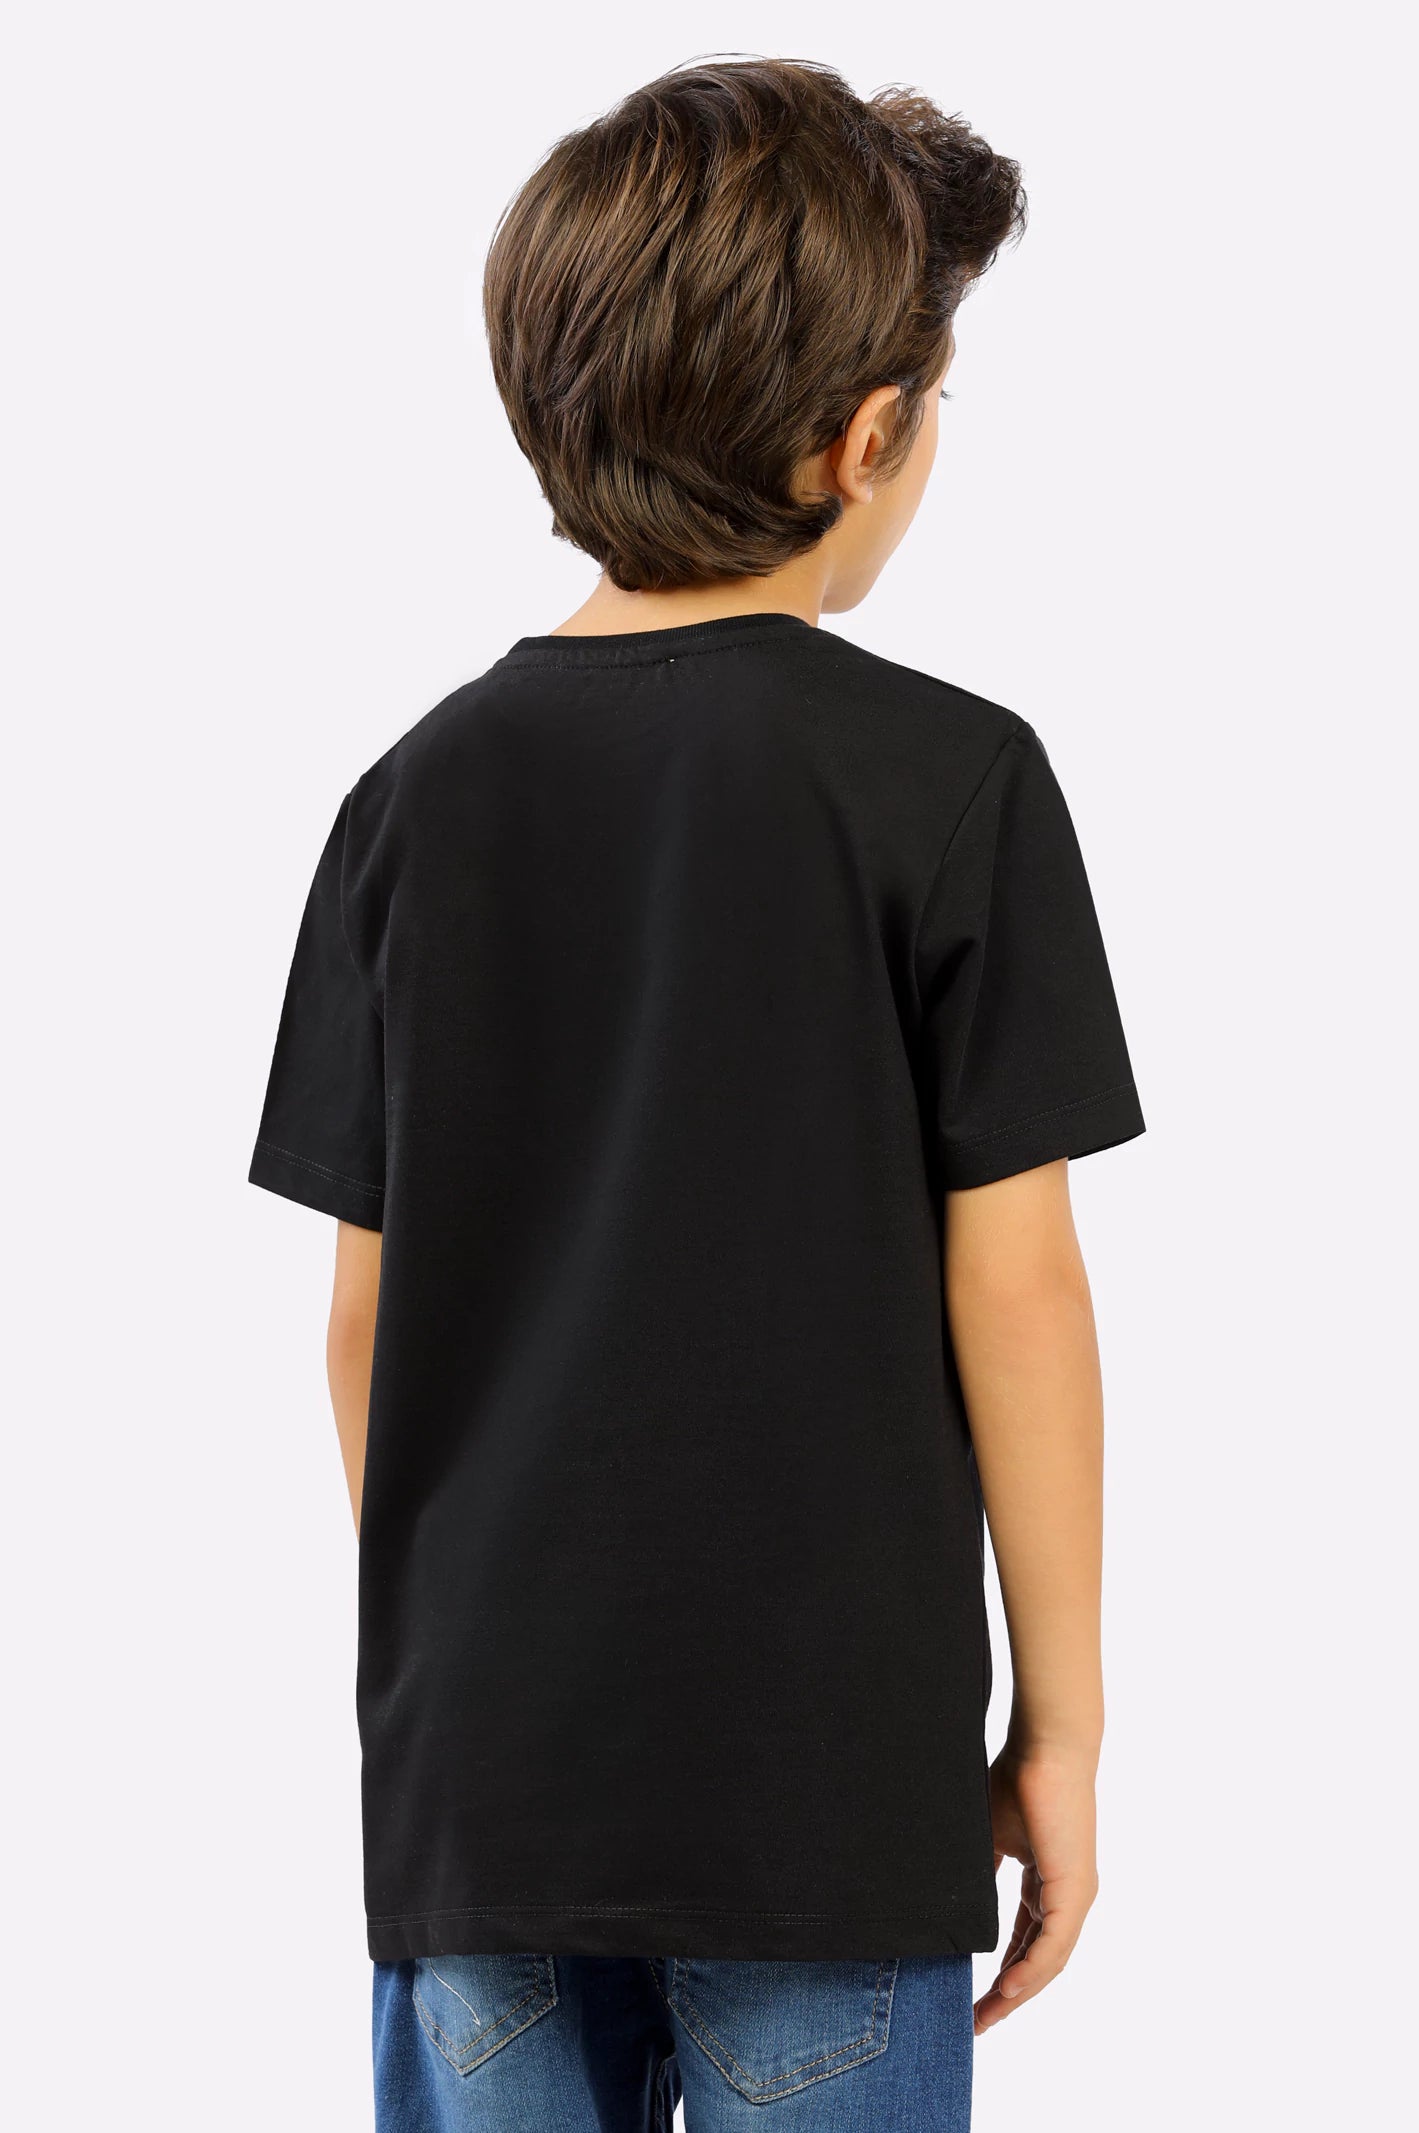 Black Graphic Printed T-Shirt From Diners